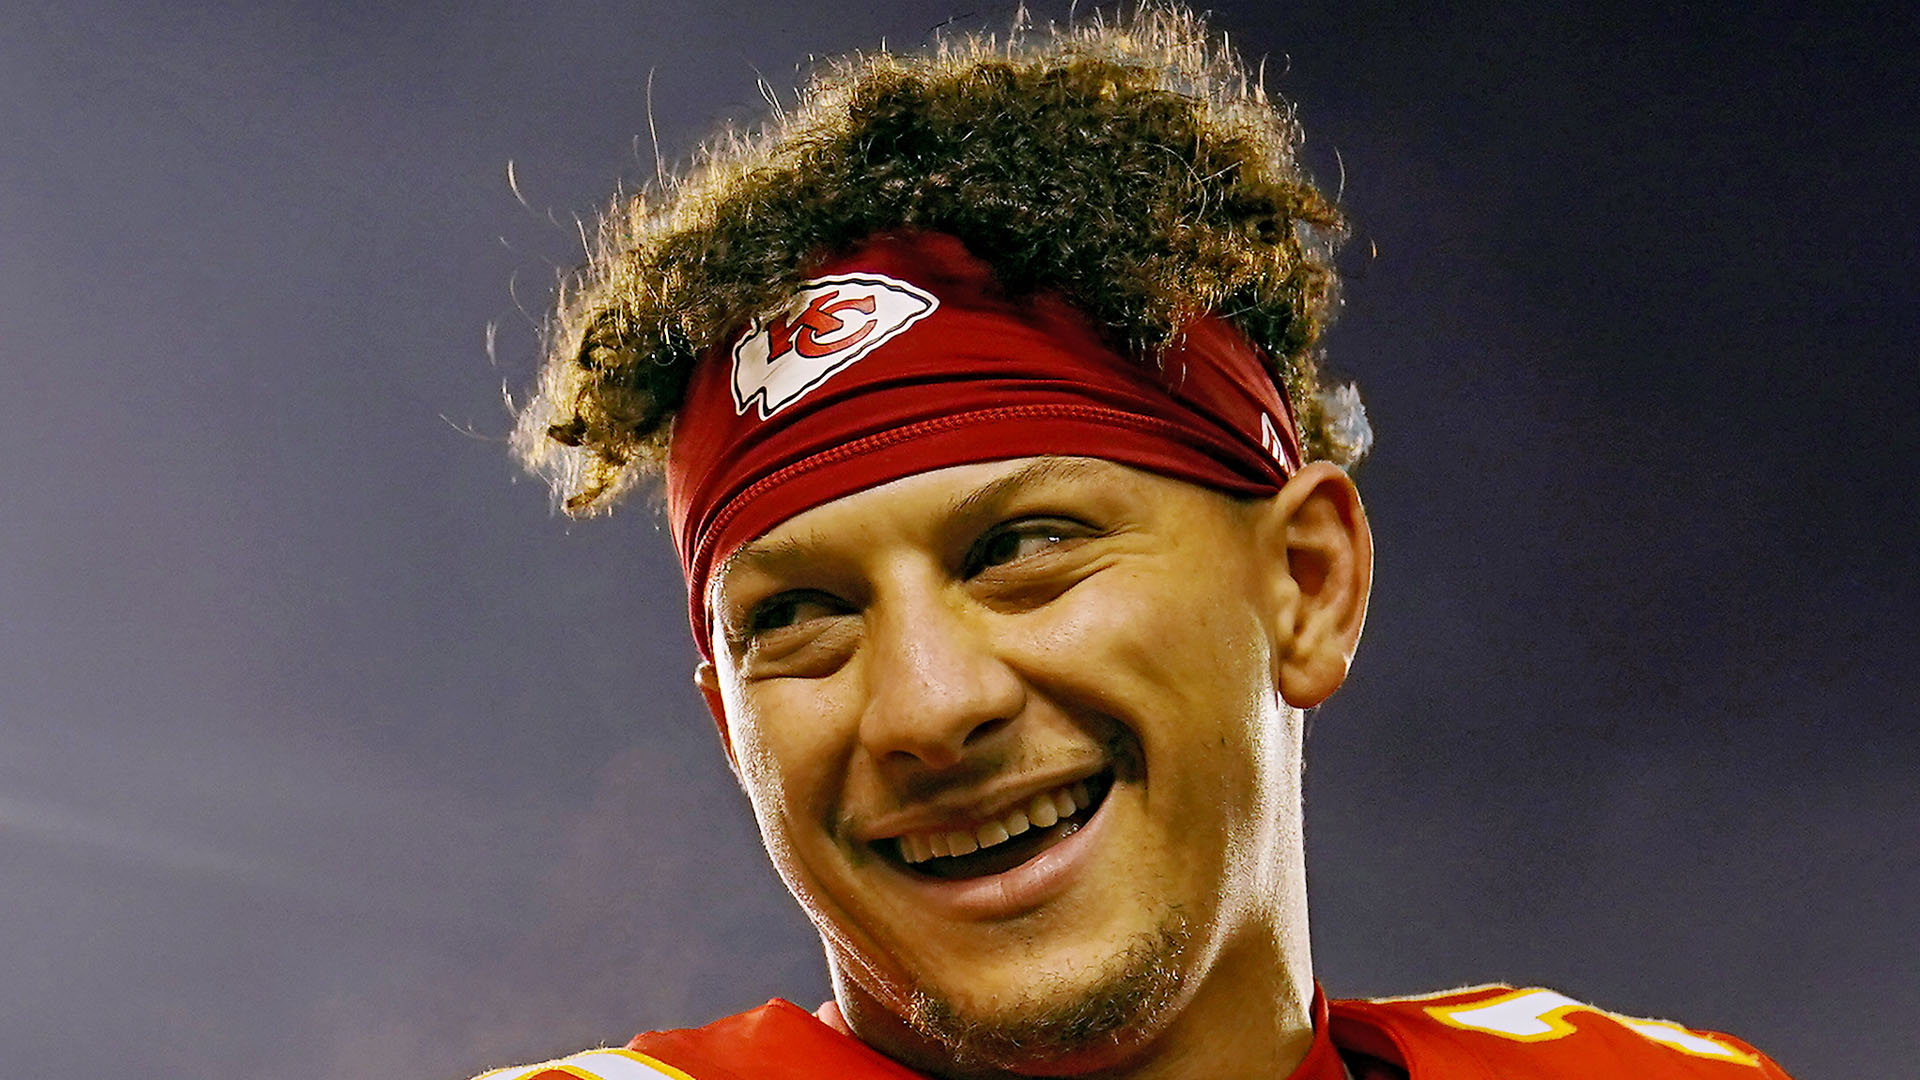 Patrick Mahomes’ weakness revealed by wife Brittany as she teases ‘hot hubby’ after claiming he ‘eats 10 a night’ [Video]